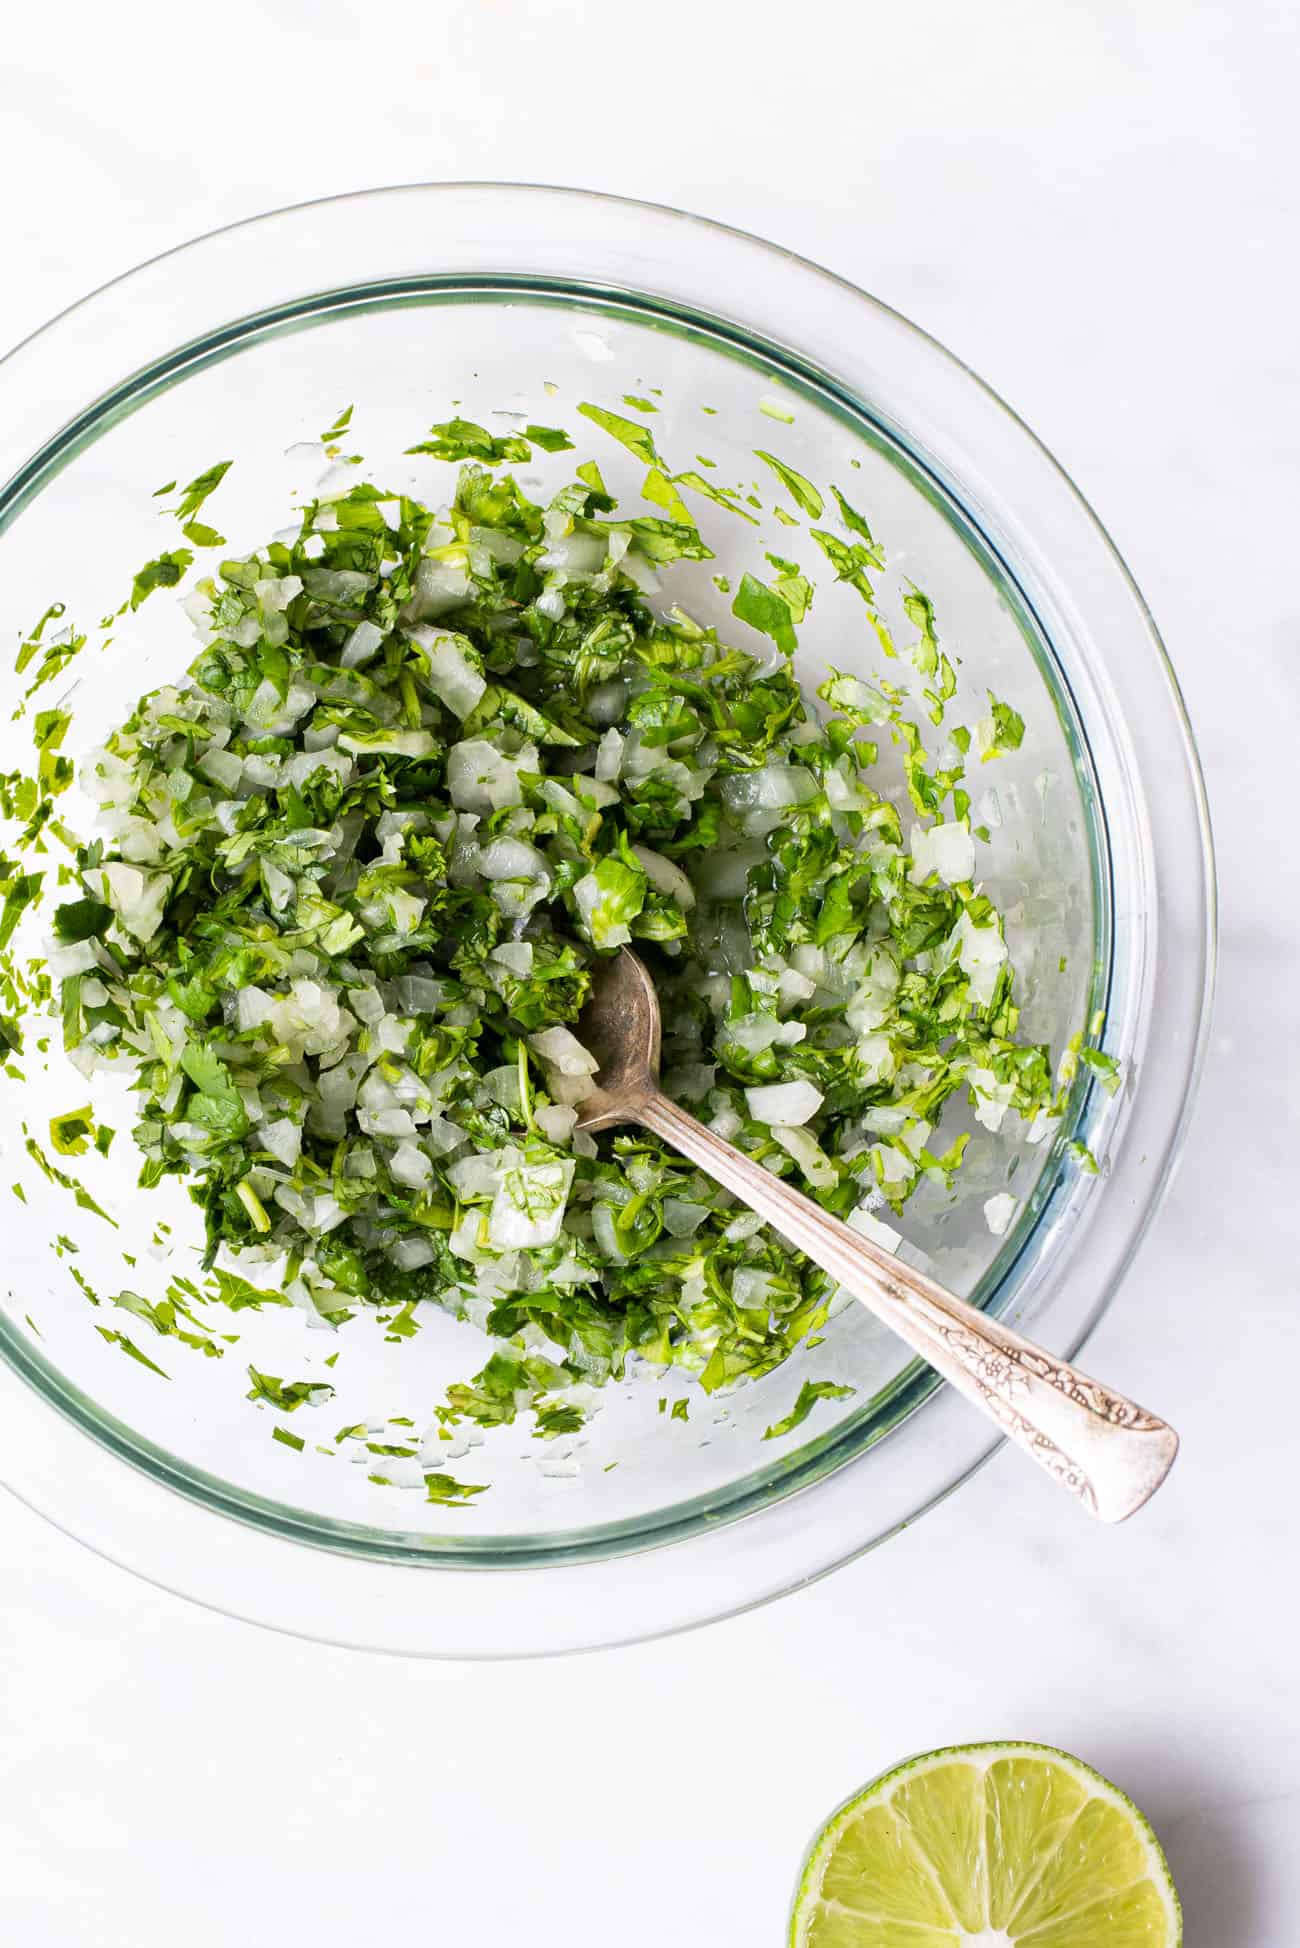 Cilantro-onion relish for tacos, in a glass bowl